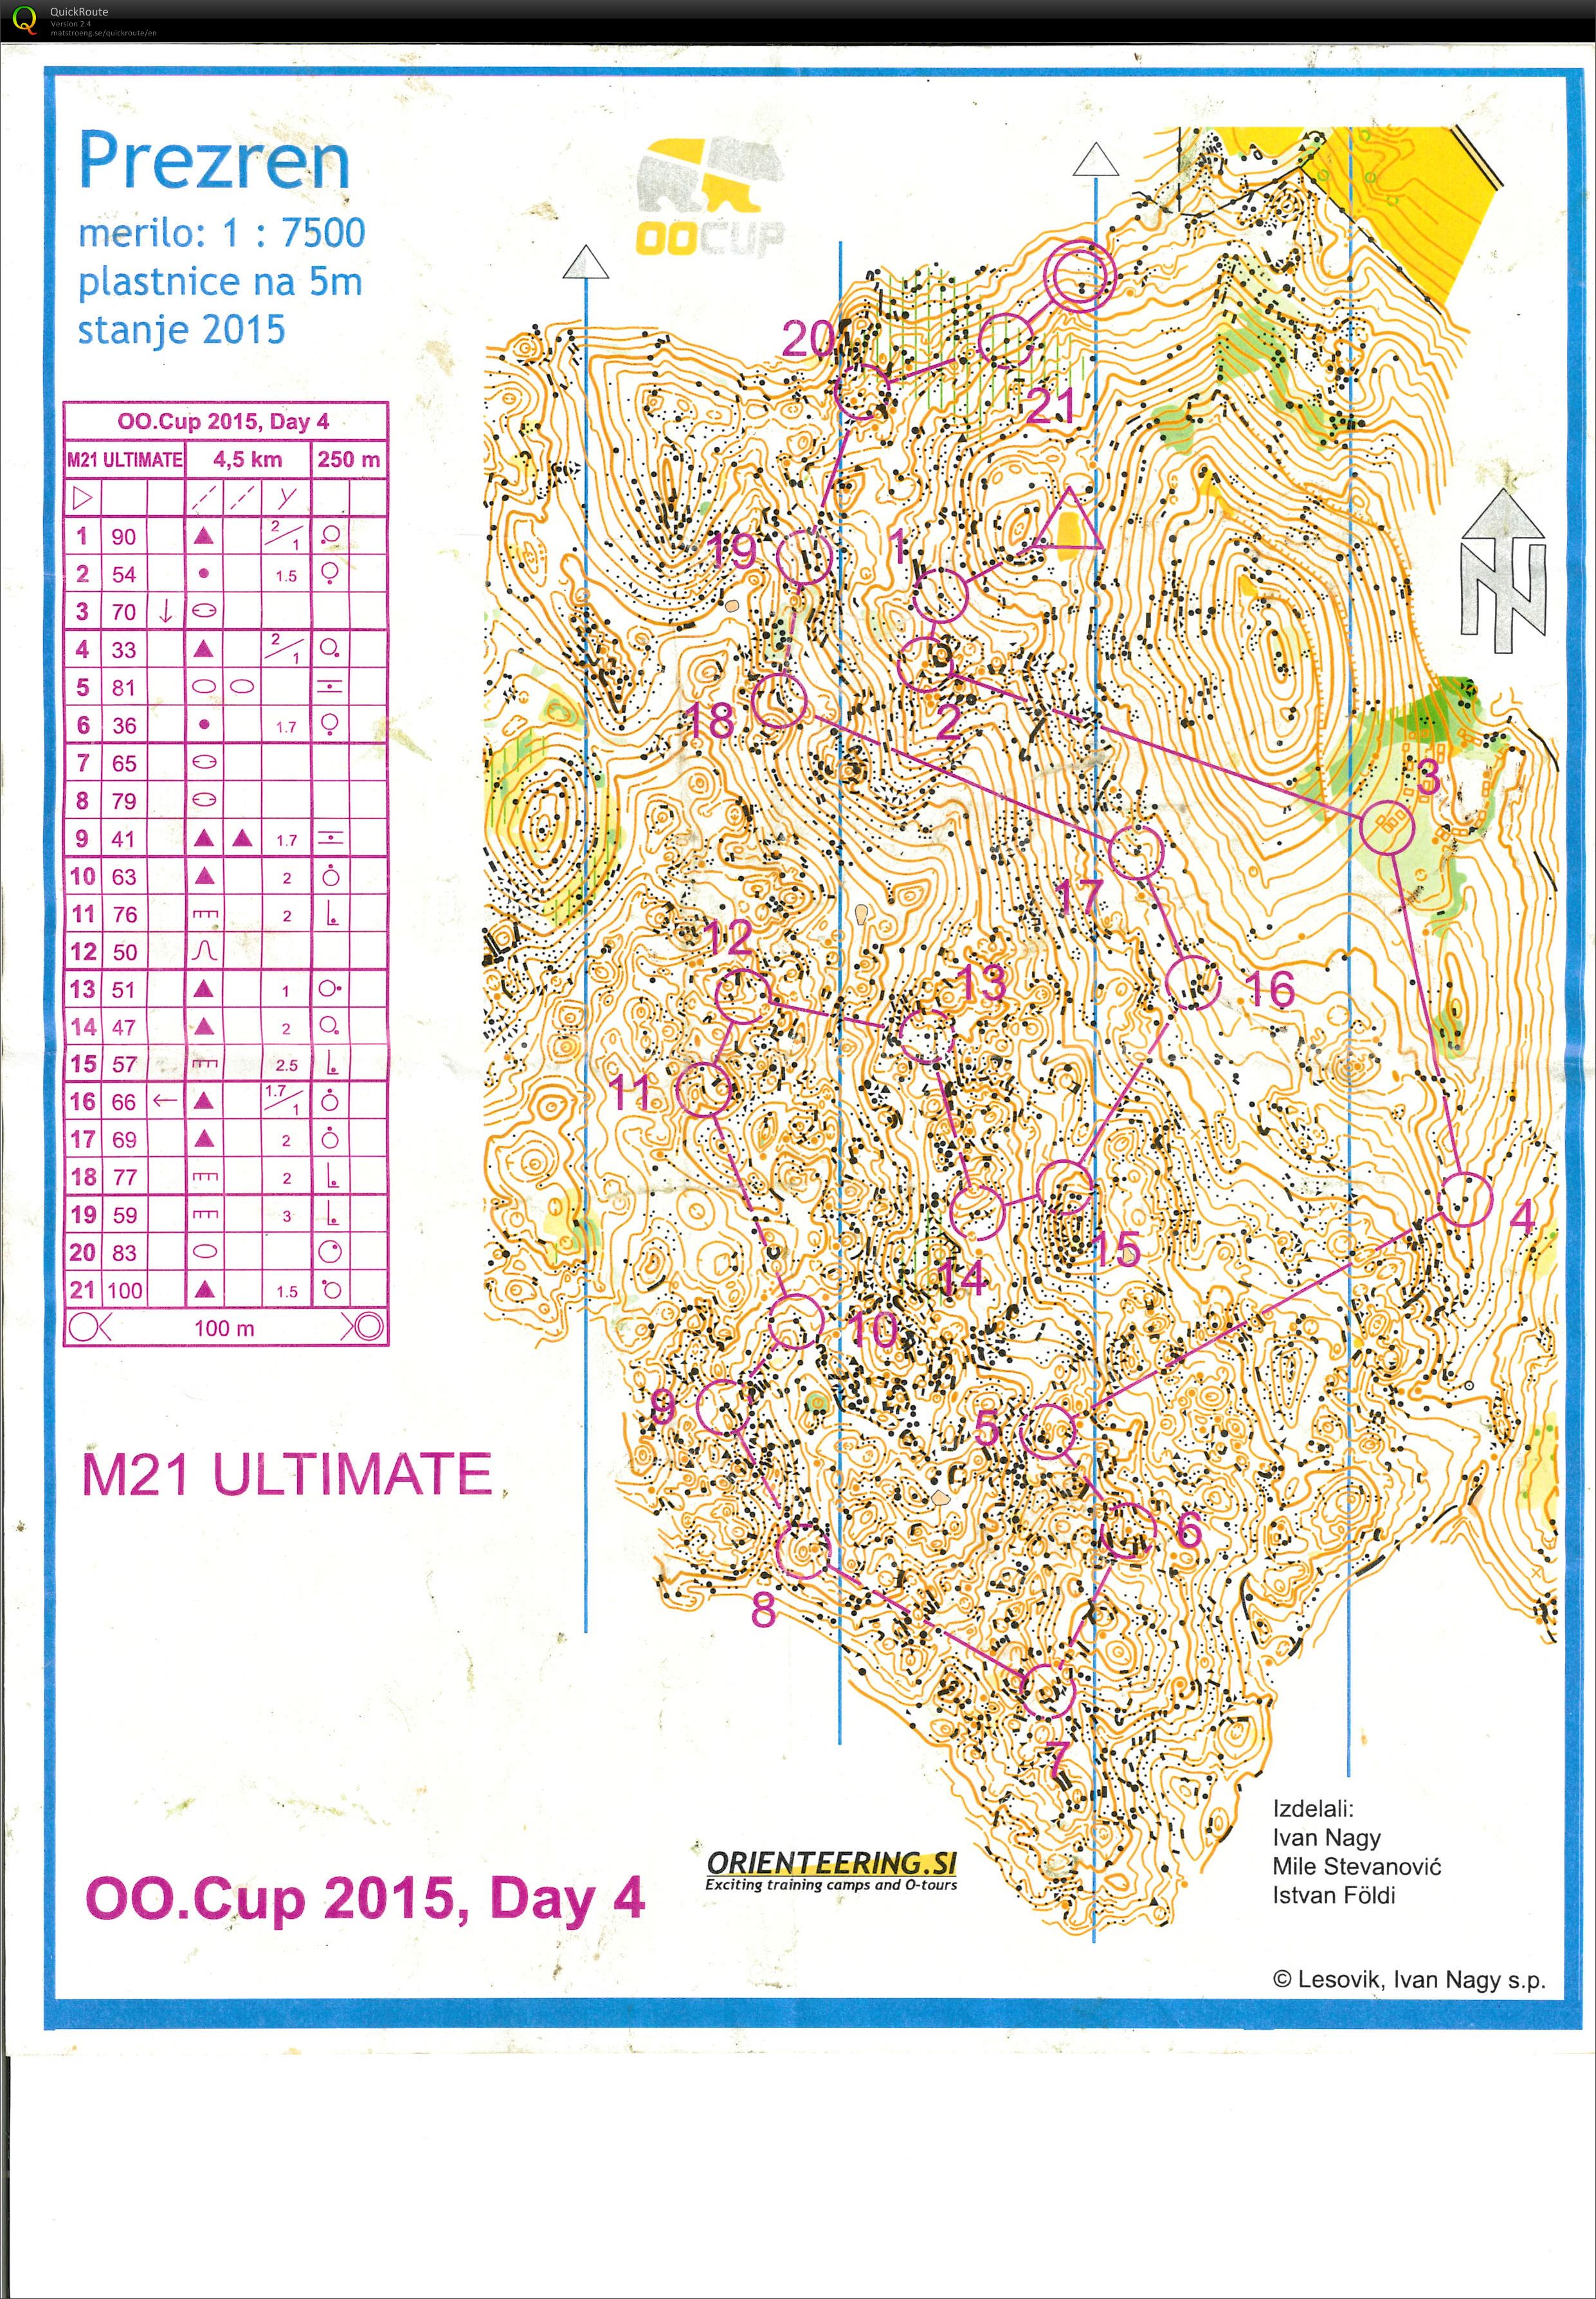 OOCup 2015 Stage 4 (28.07.2015)